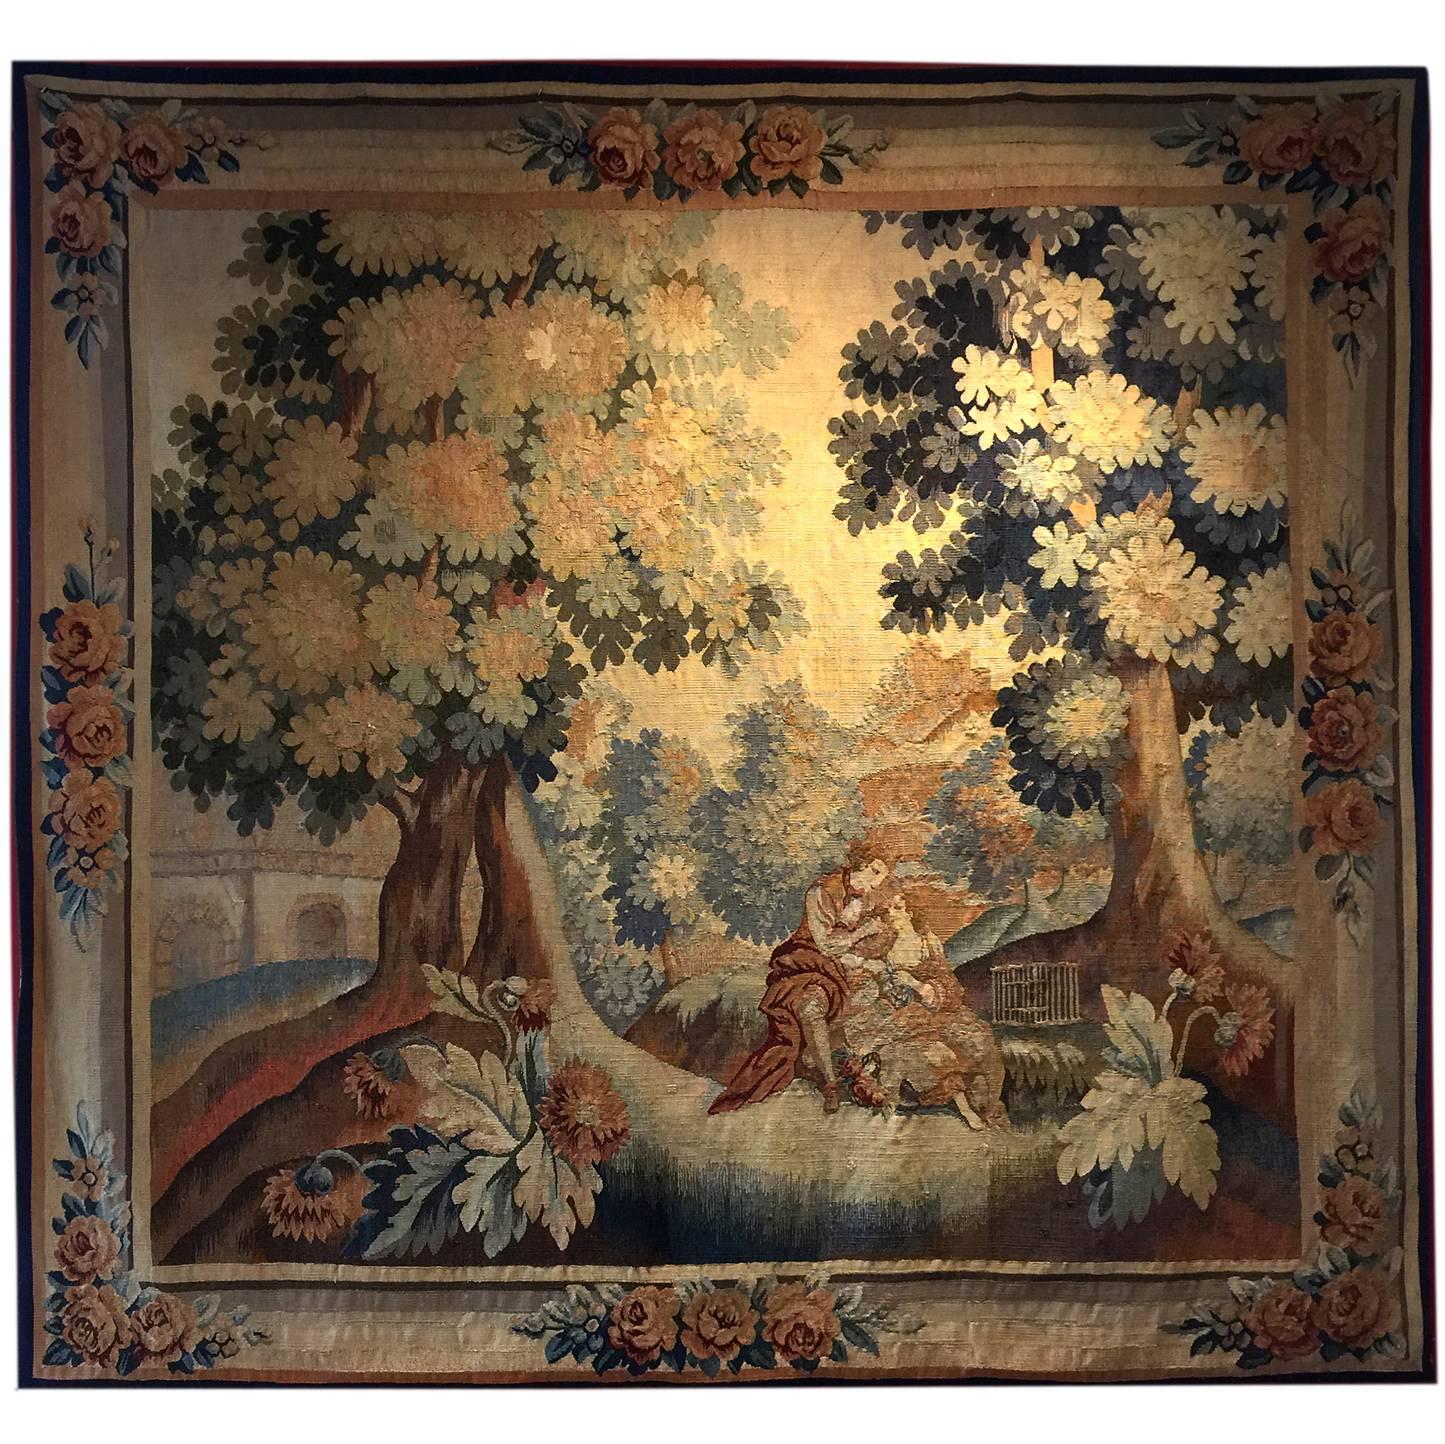 Antique Rugs, Tapestry Flemish Wall Decoration Object, Decorative rugs For Sale